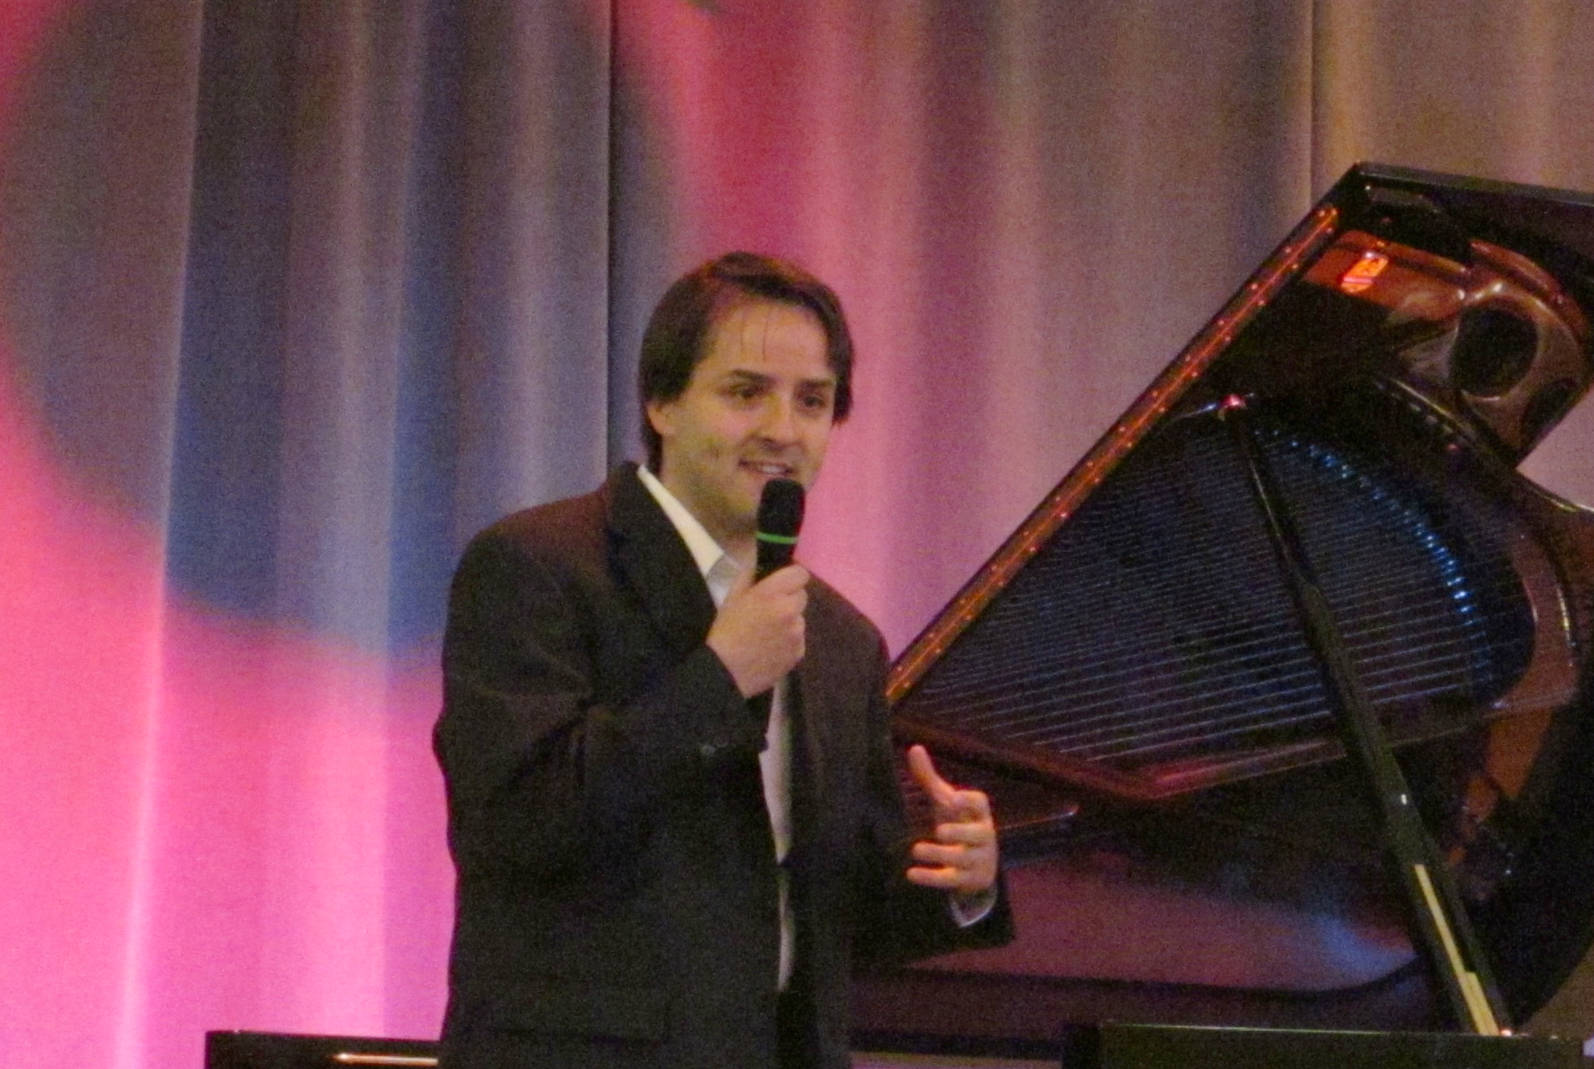 Jon Hays addresses the crowd in the Juneau Arts & Culture Center Friday night during his piano recital.(Ben Hohenstatt | Capital City Weekly)